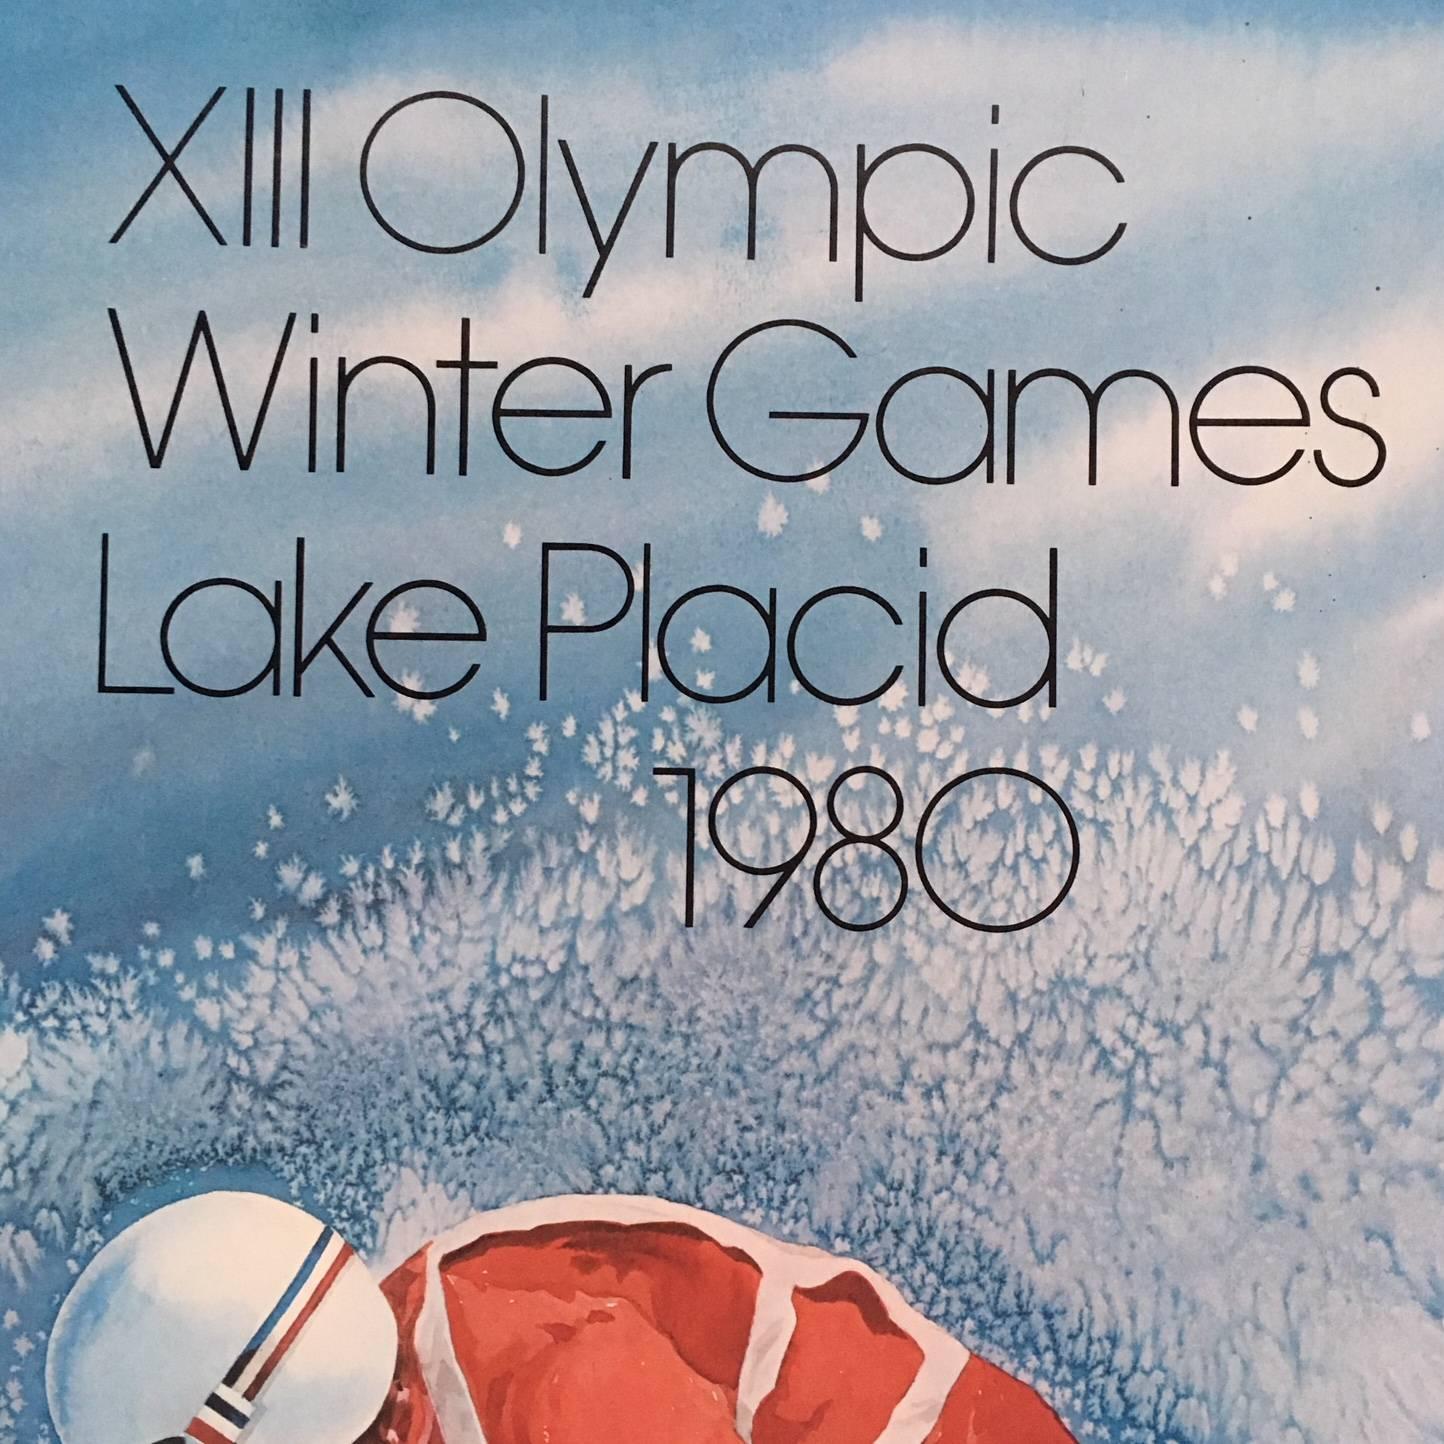 Original skiing poster from the 1980 Lake Placid Olympics, in excellent color and condition as issued on fibercore, with a series of U.S Postal Stamps commemorating the Lake Placid Olympics, adhered to the poster and canceled on the day of issue.